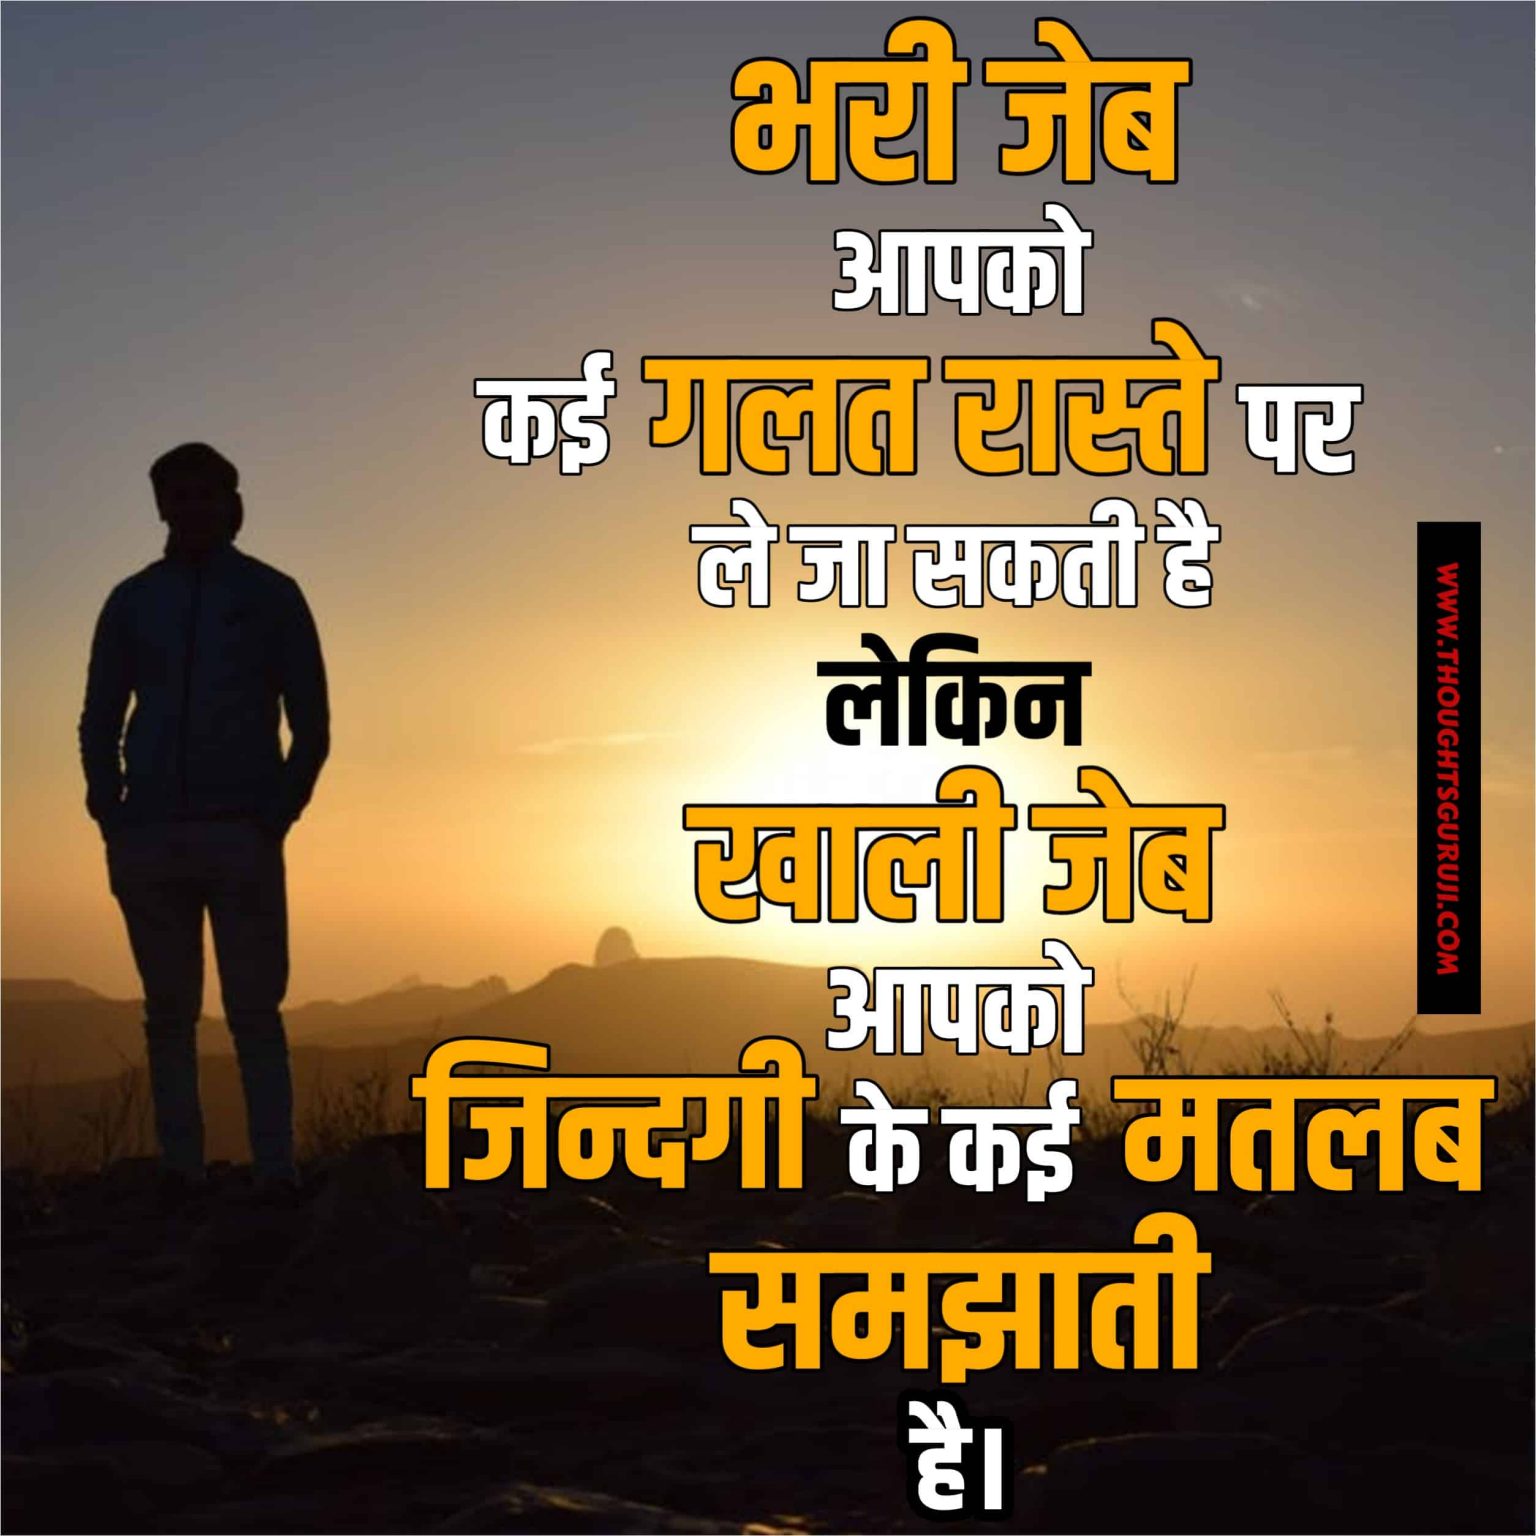 Best Motivational Quotes Images In Hindi | lifescienceglobal.com